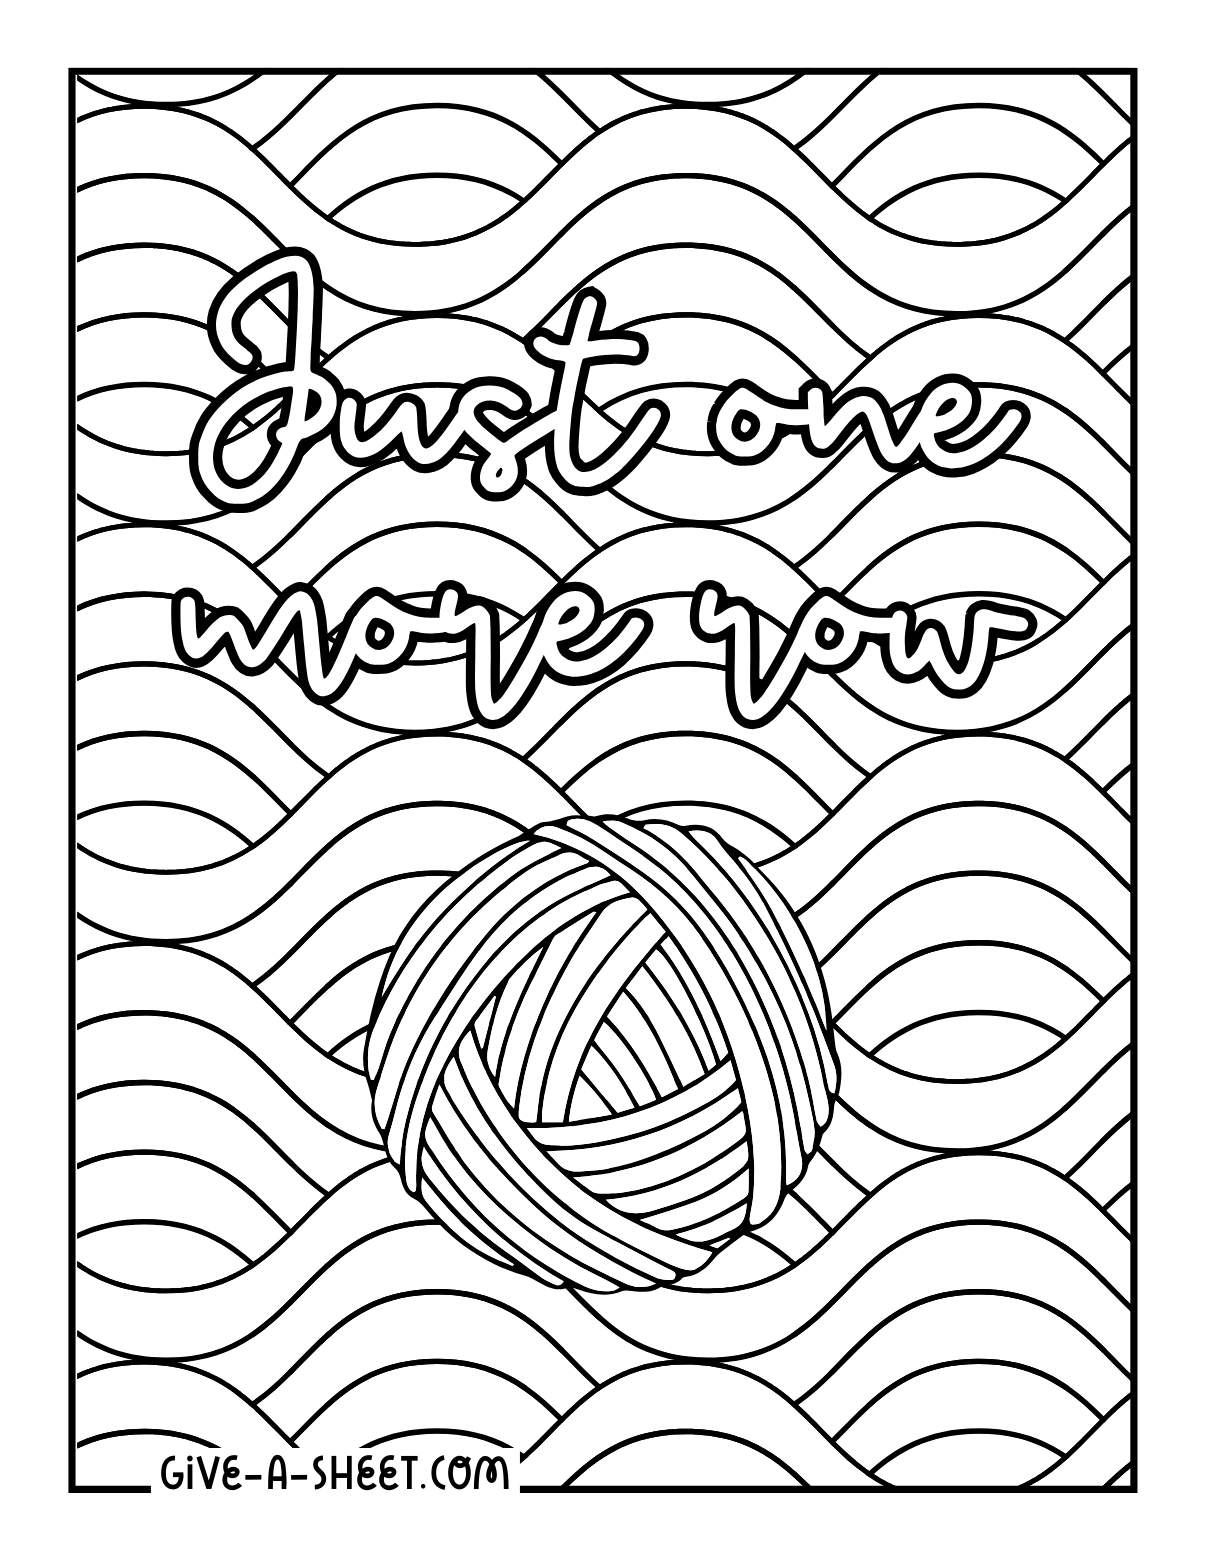 Detailed crochet weaving coloring page.